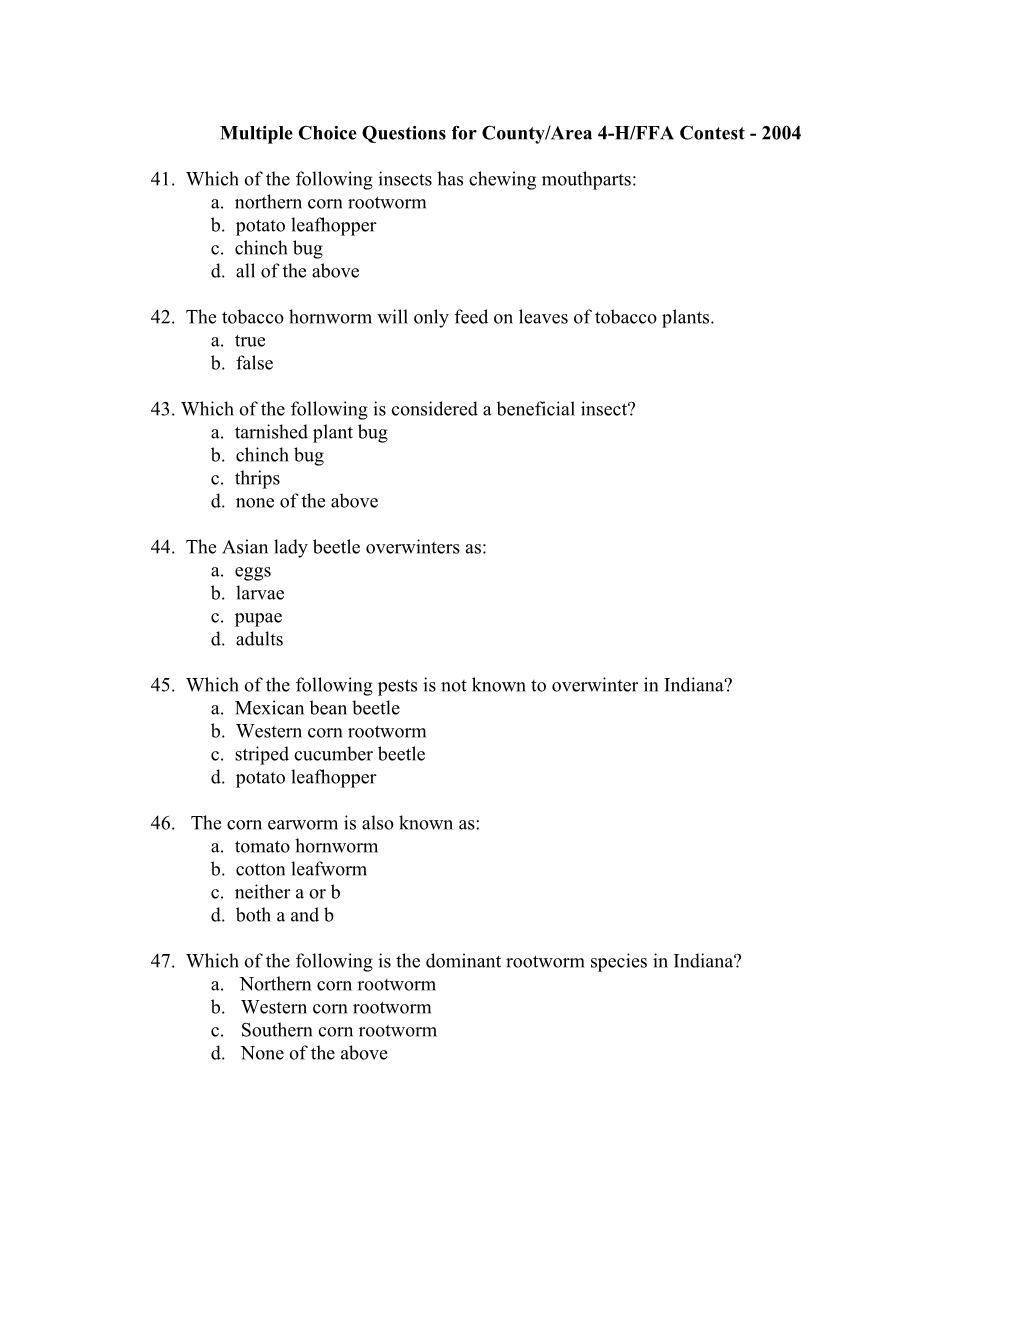 Multiple Choice Questions for County/Area 4-H/FFA Contest - 1998 s1